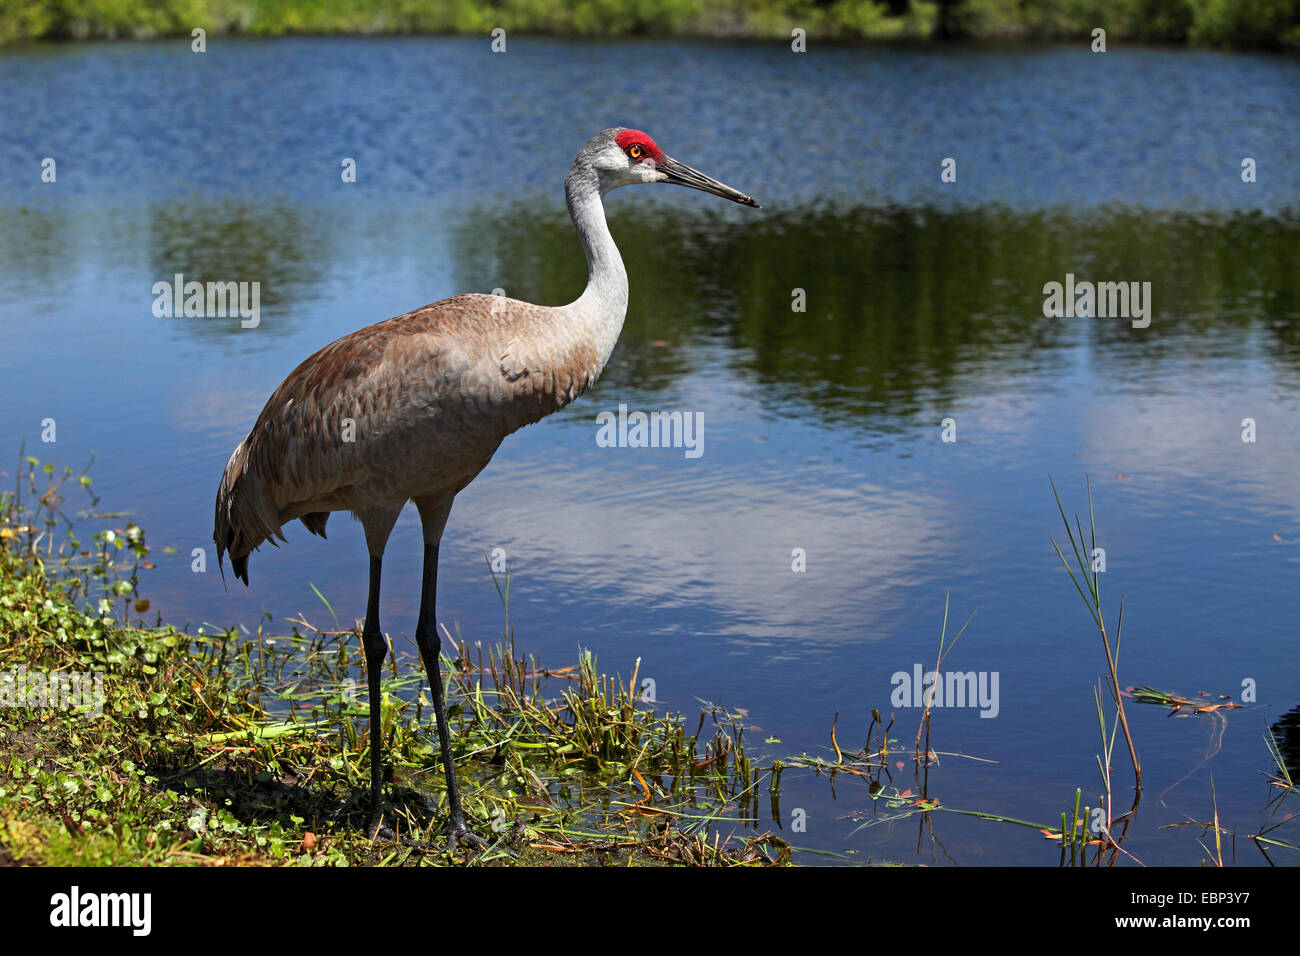 sandhill crane (Grus canadensis), stands at the lakeside, USA, Florida Stock Photo